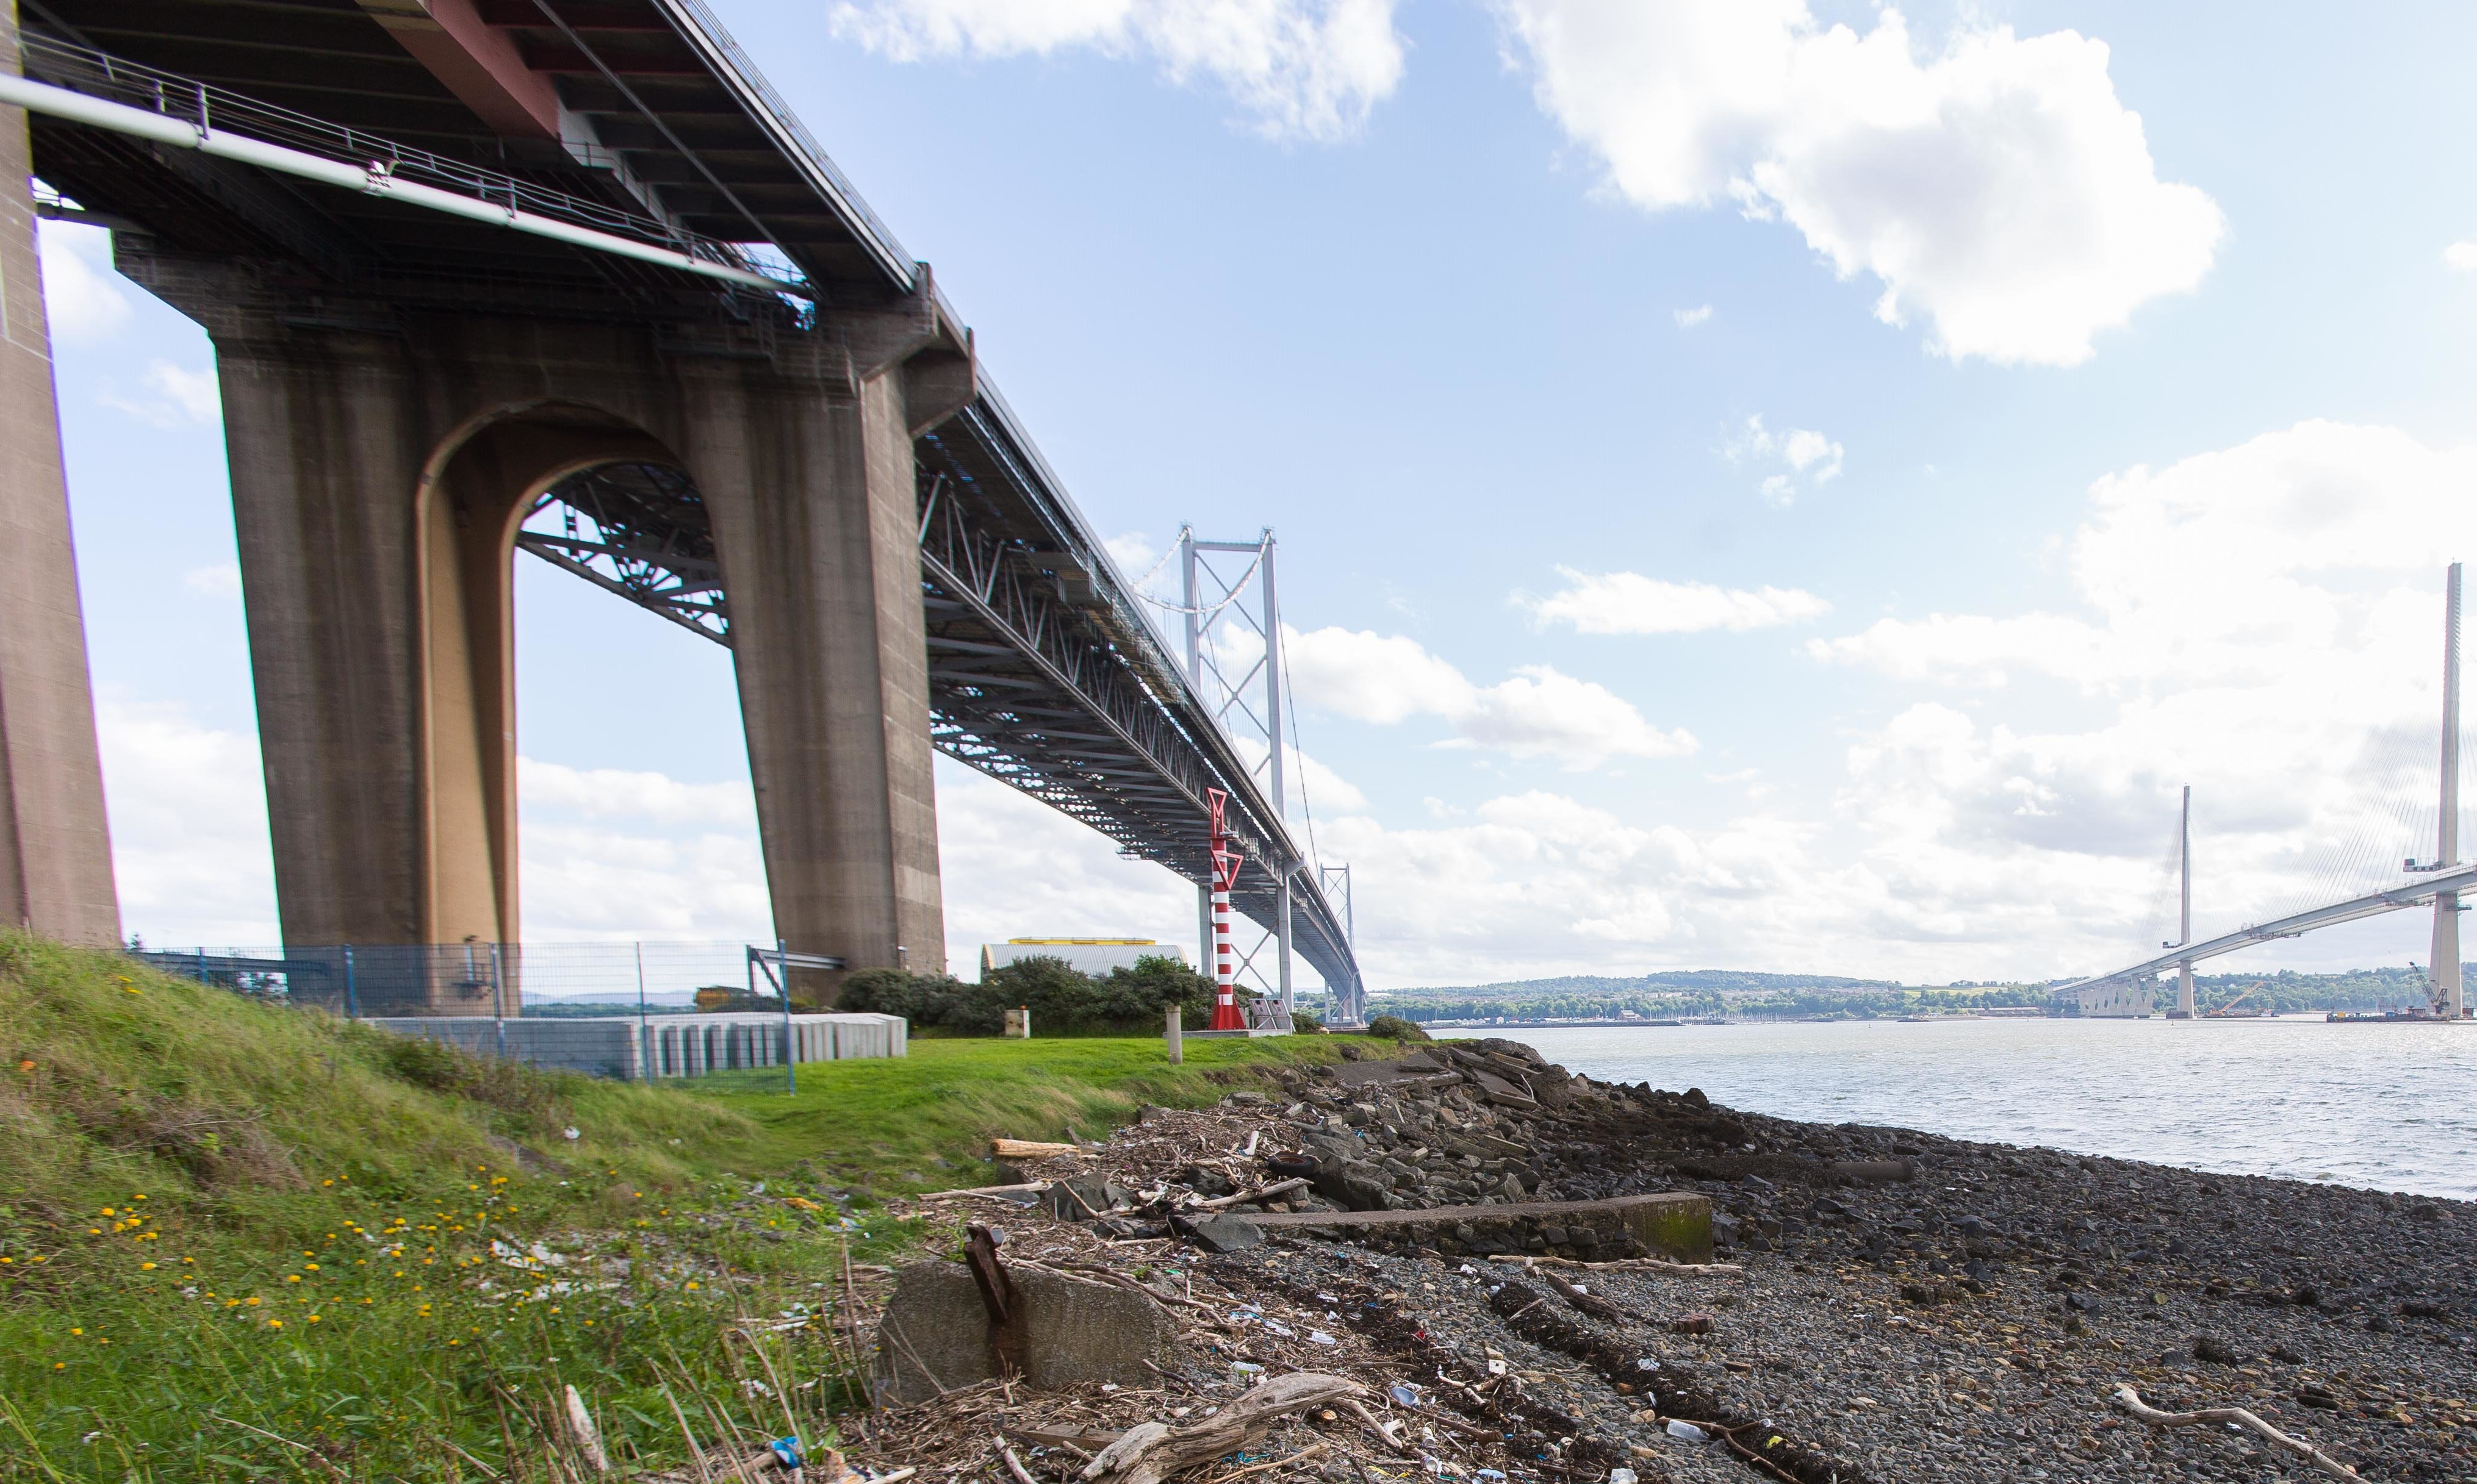 An oil spill on the Fife coast by the Forth Road Bridge and Queensferry Crossing is being probed.